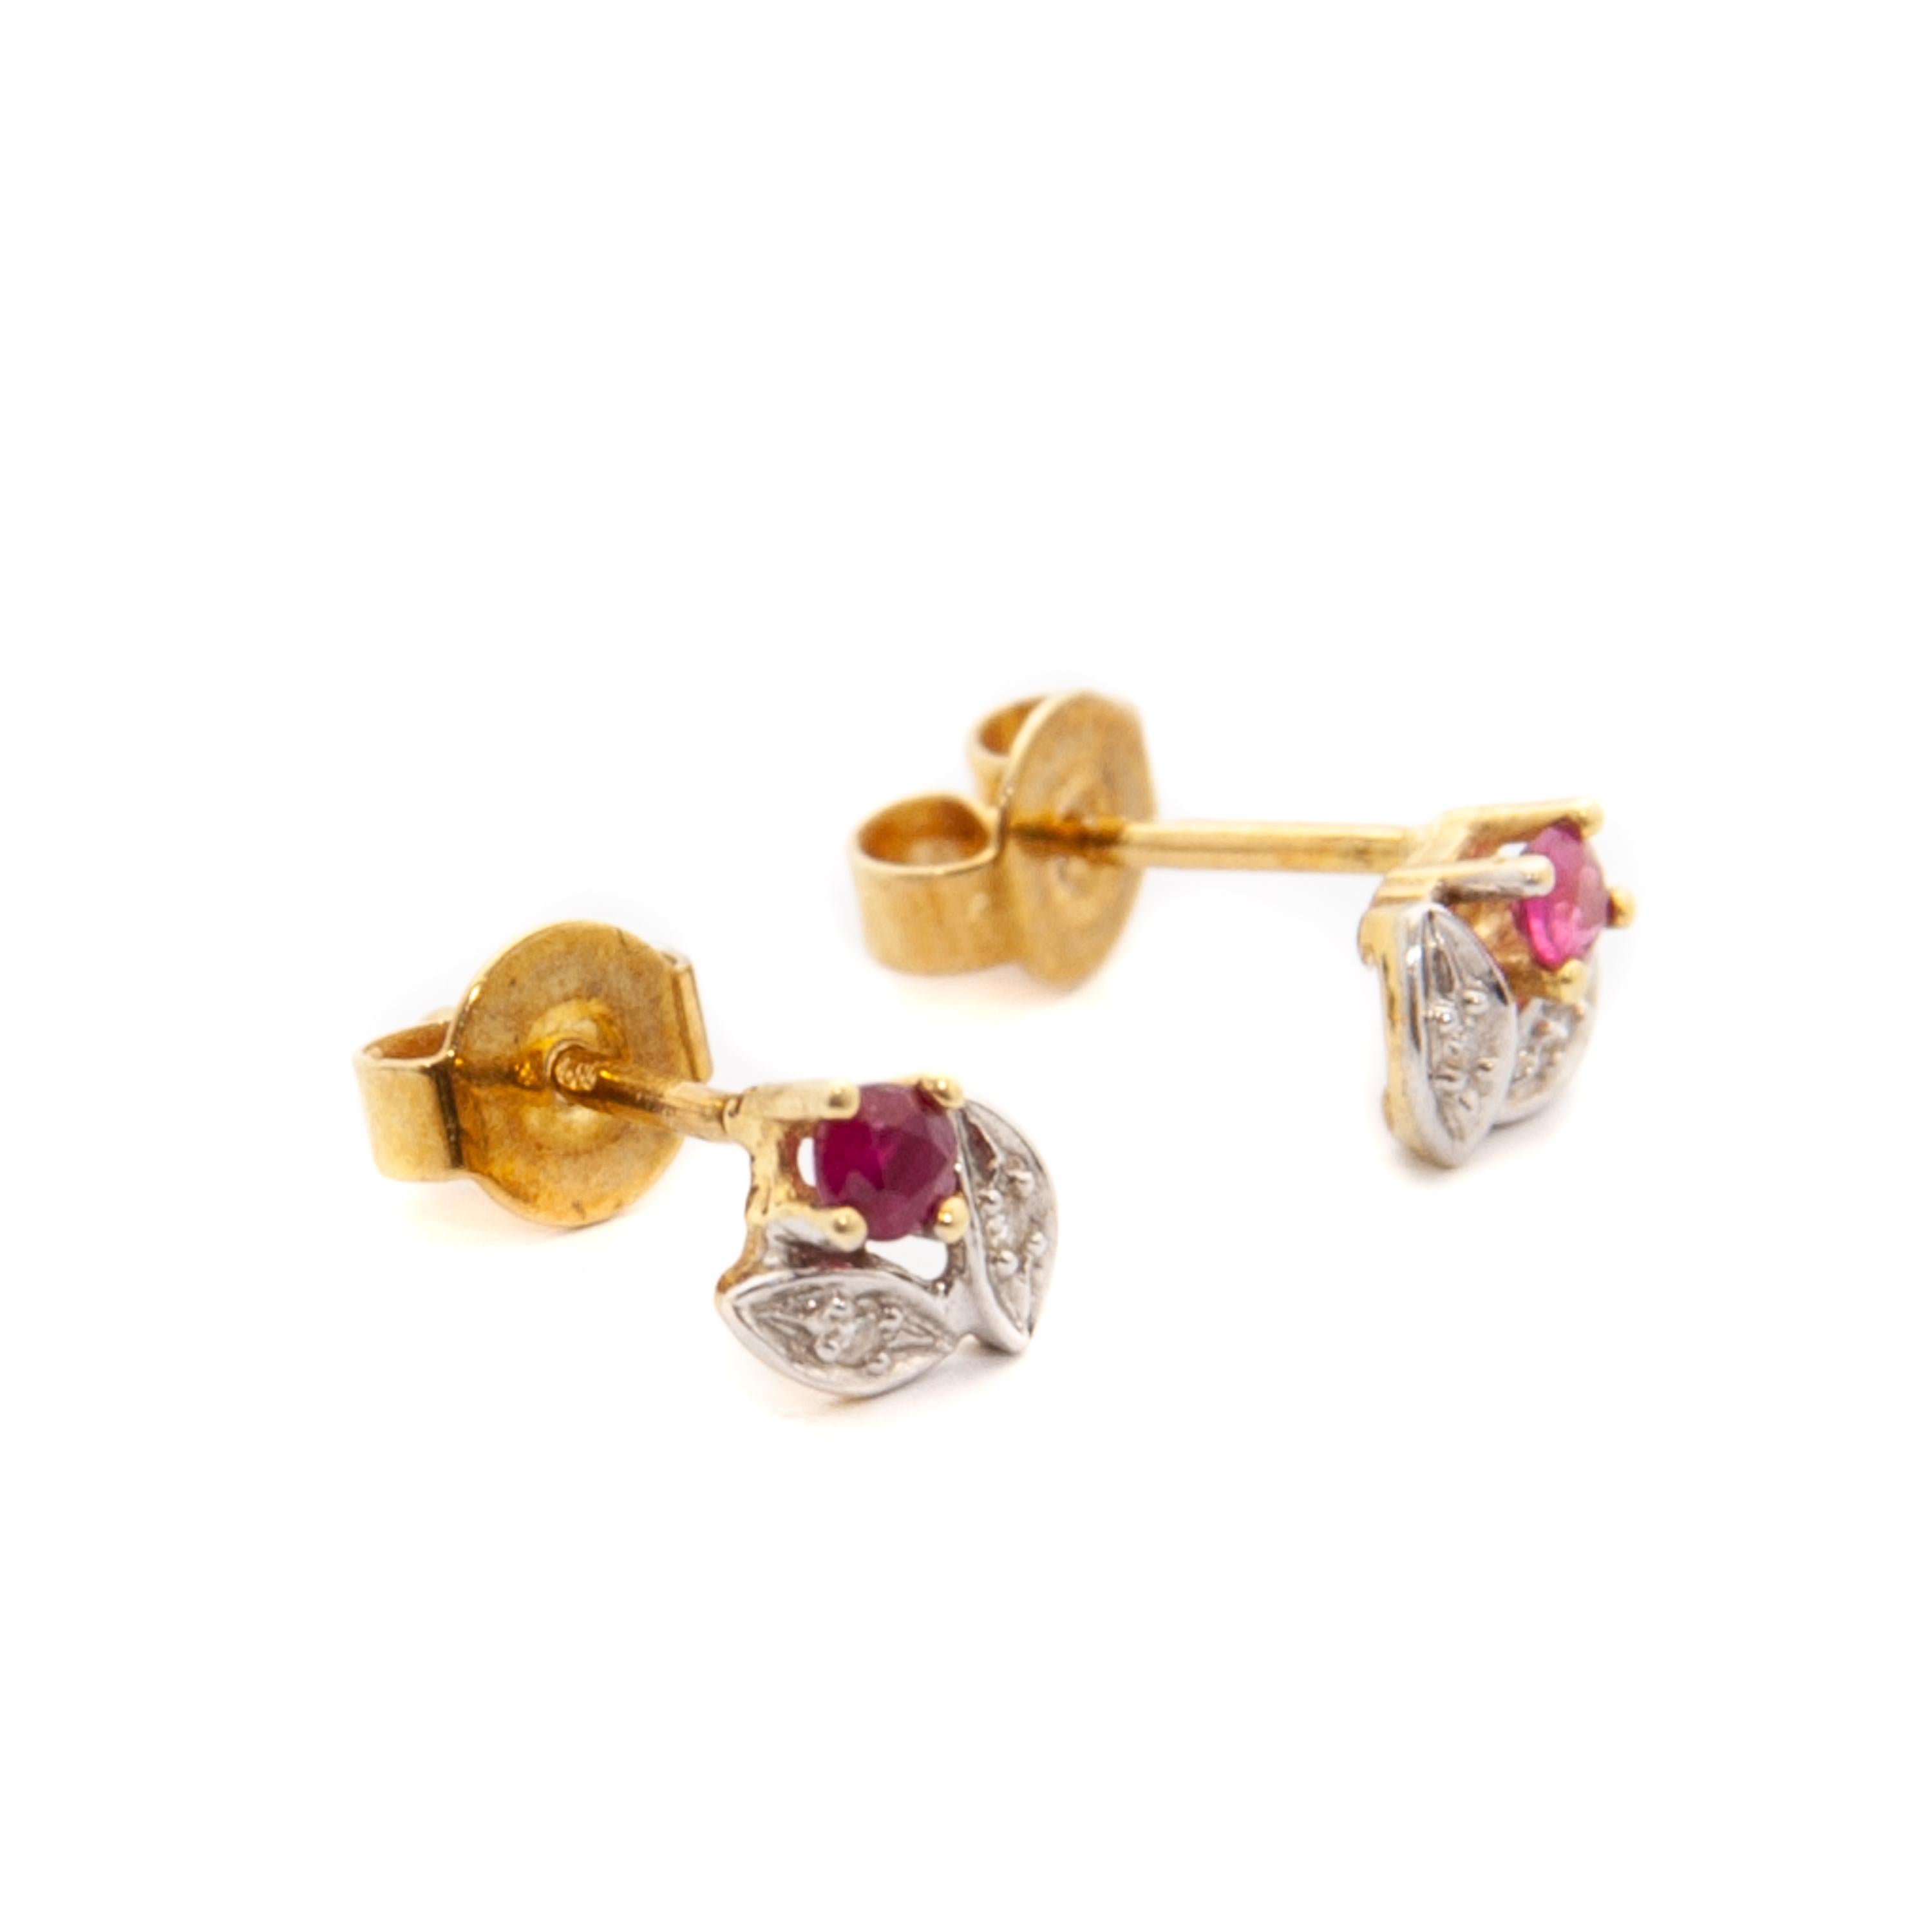 These beautiful vintage stud earrings are set with rubies ​​and diamonds and made of 14 karat gold. The flower studs are set with a ruby ​​that is placed between 14 karat yellow gold prongs. The lovely leaves are made of 14 karat white gold and